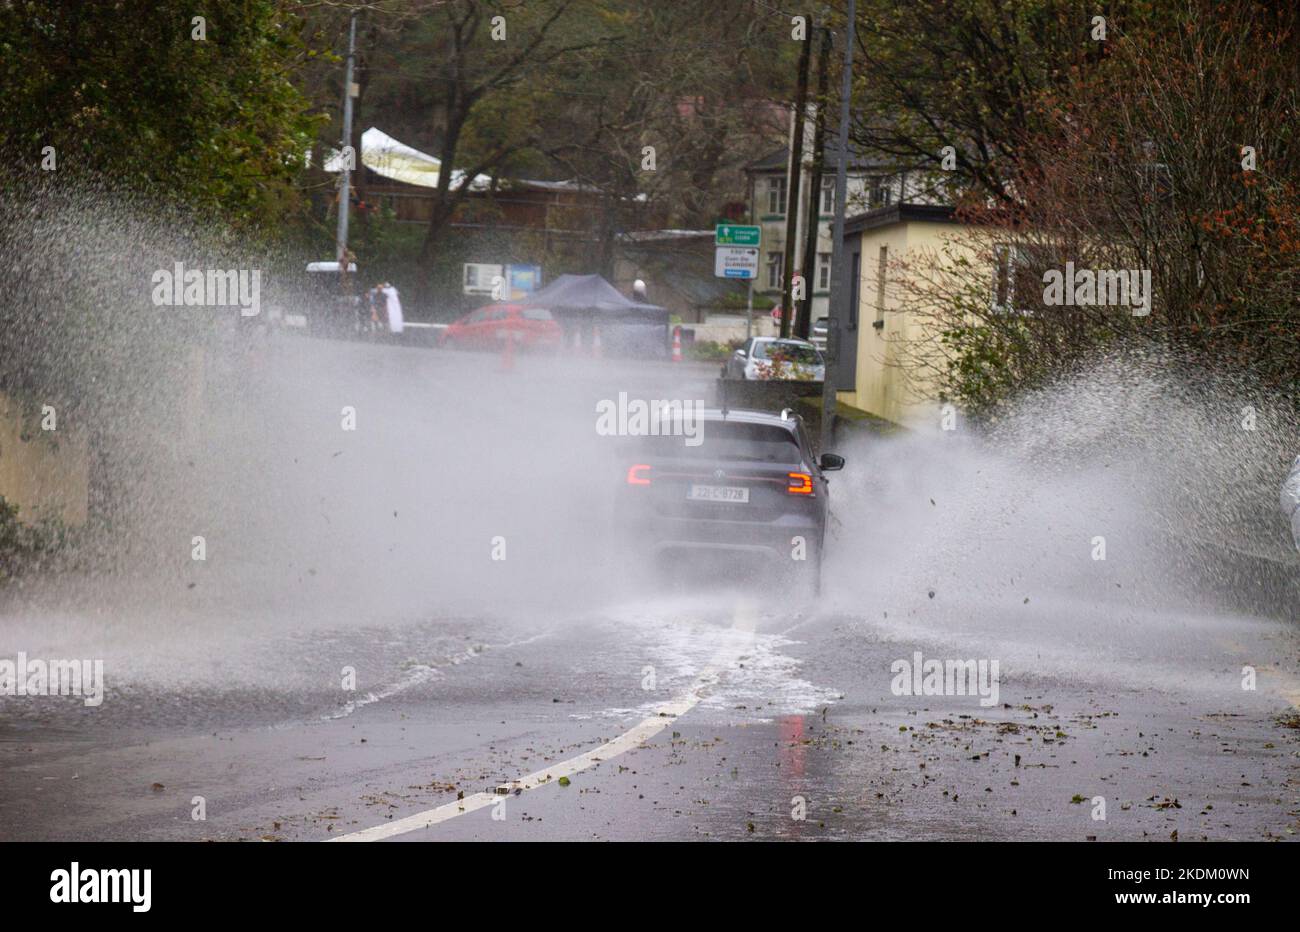 Cars or Vehicles driving through flooded roads, Leap, West Cork, Ireland Stock Photo